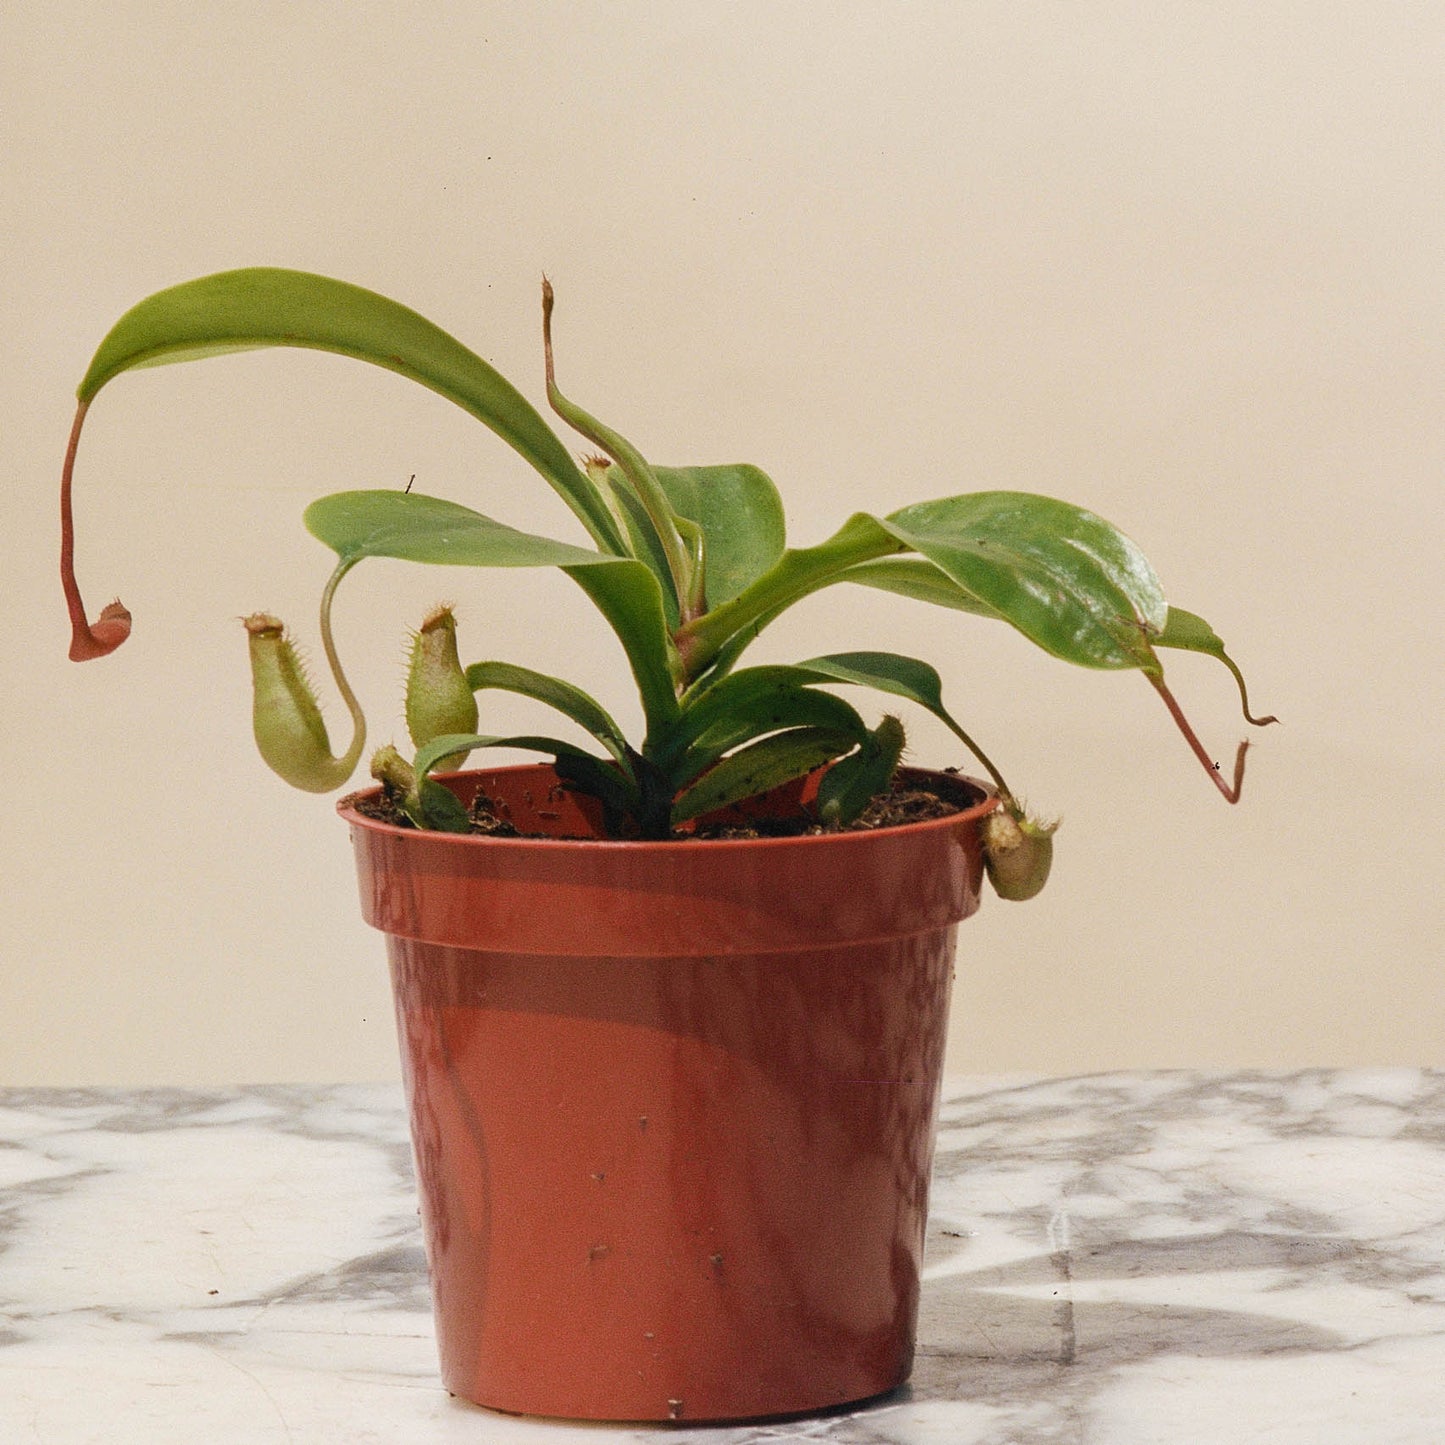 Asian Pitcher Plant (Nepenthes) in a 4 inch pot. Indoor plant for sale by Promise Supply for delivery and pickup in Toronto